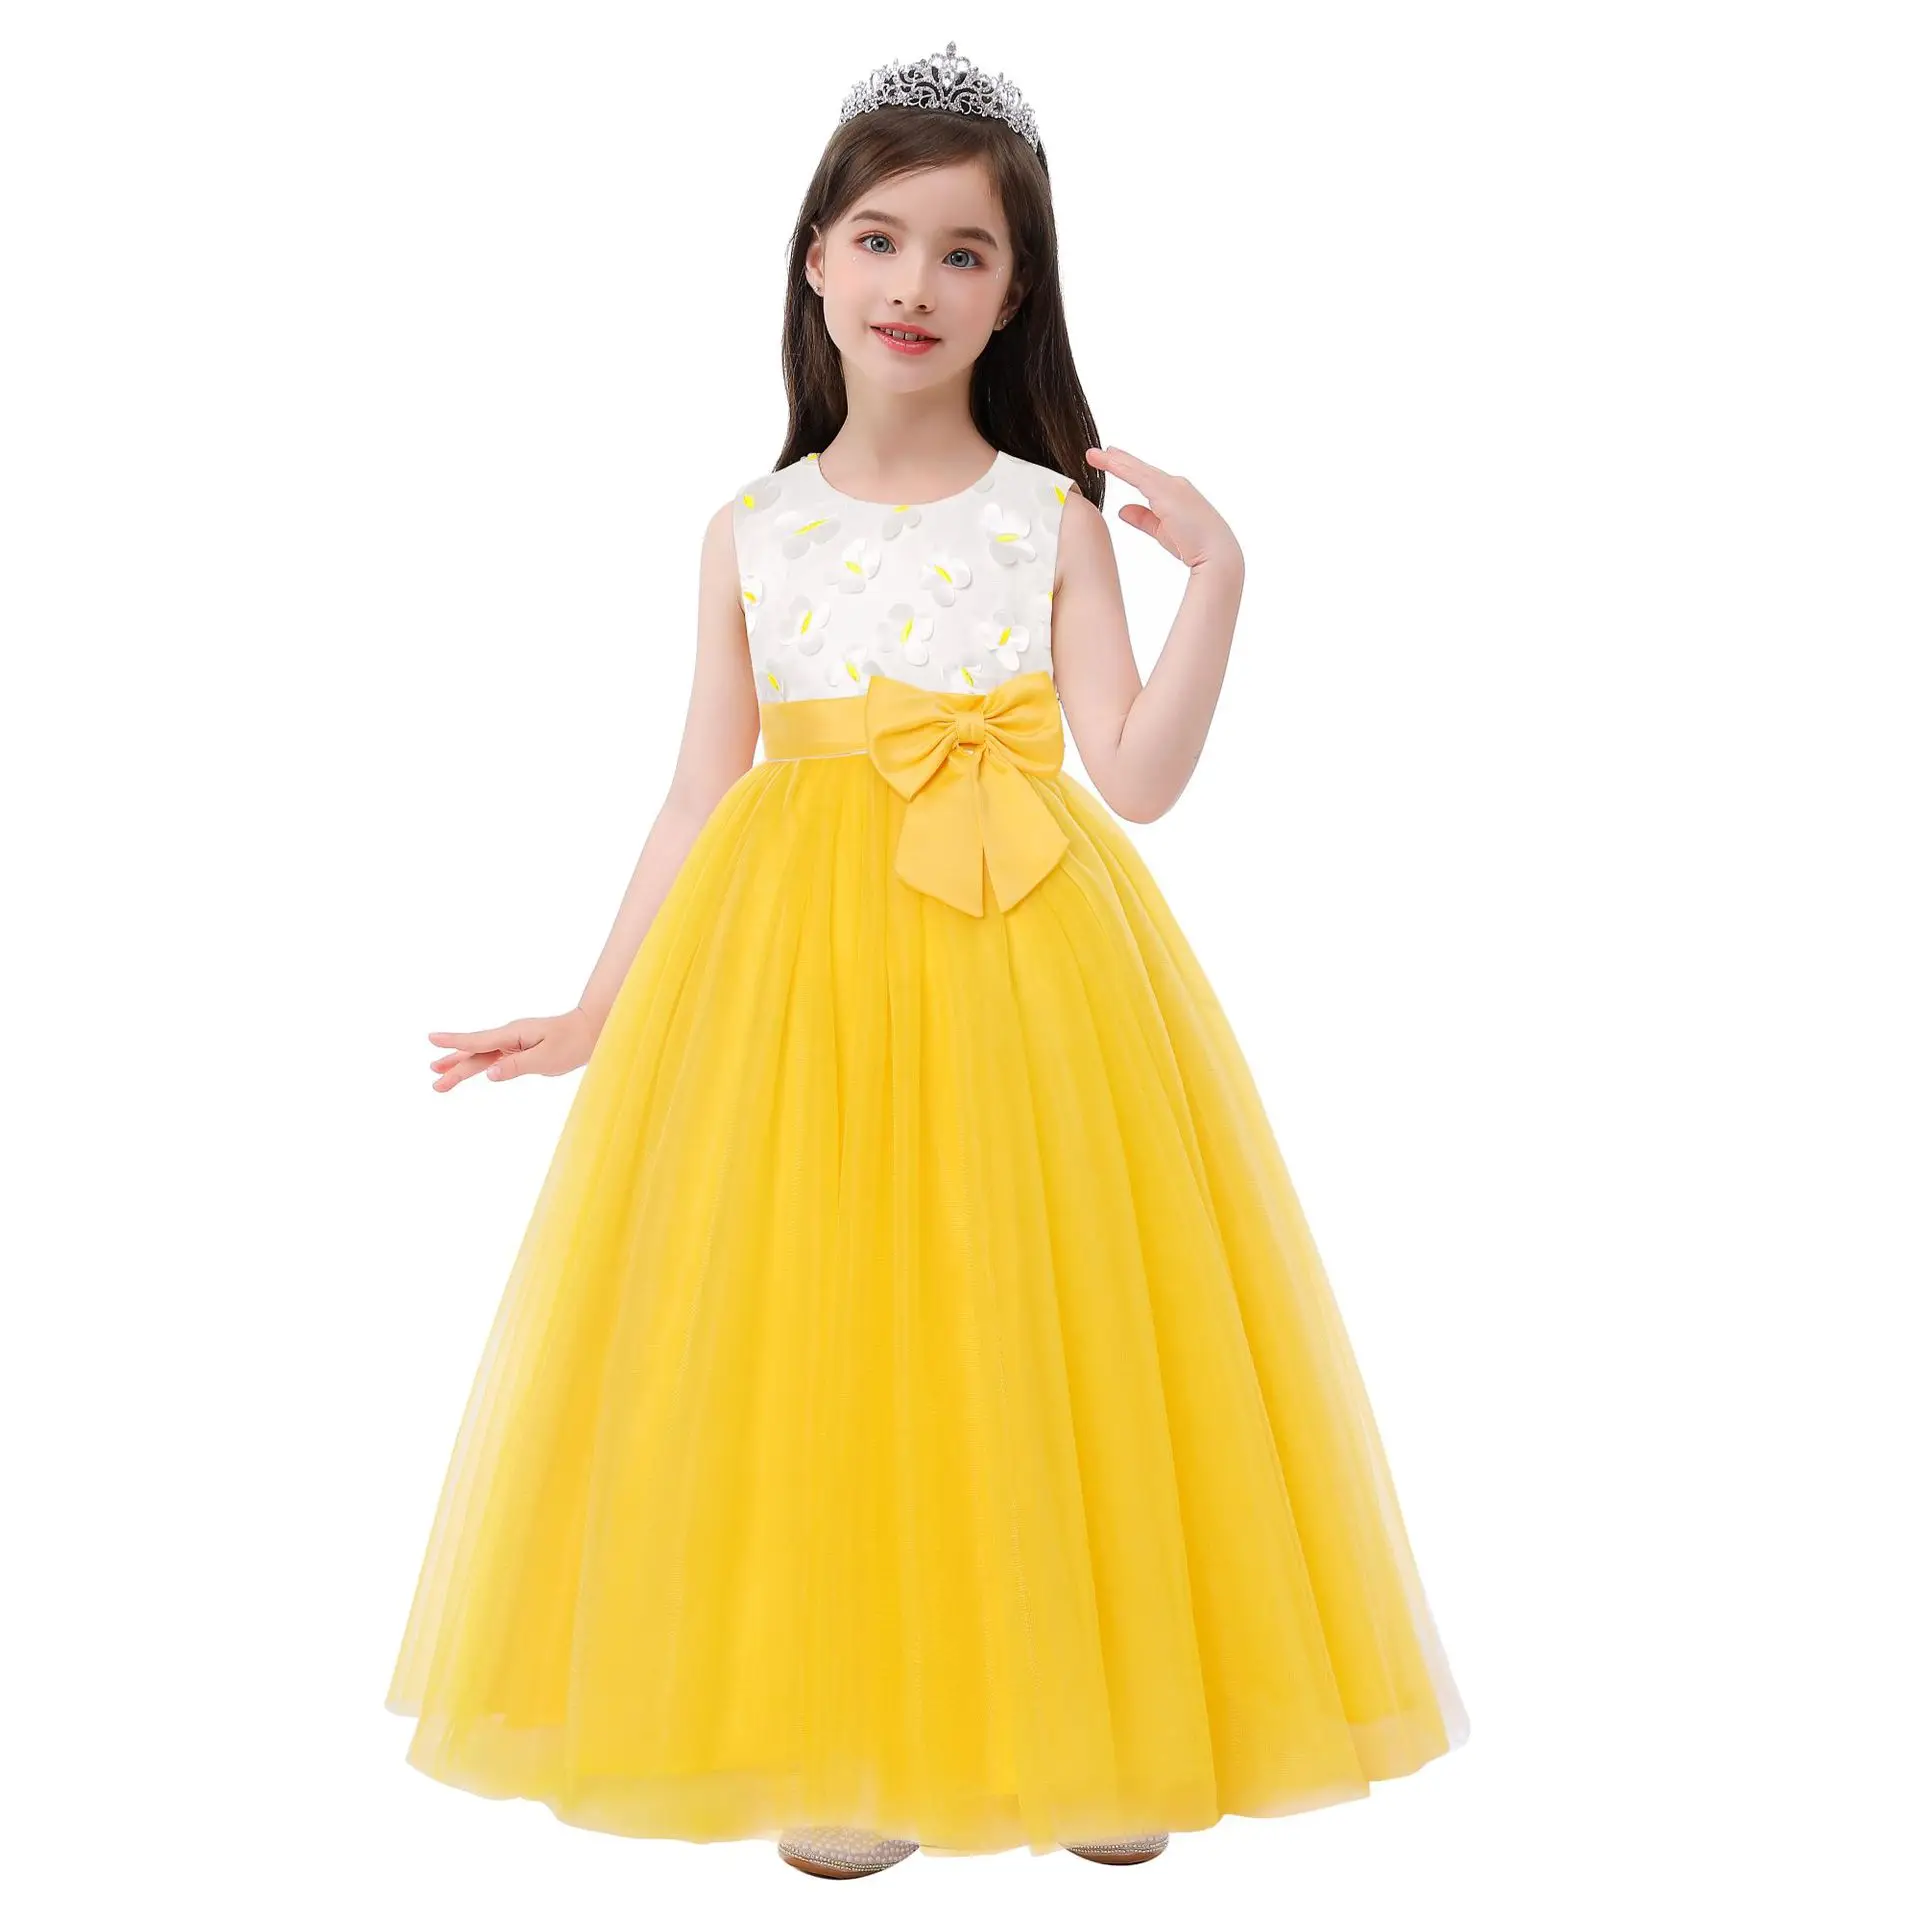 

Girls Princess Tulle Bow Pageant Dress Puffy Wedding First Holy Communion Baptism Bridesmaid Dress Party Tutu Maxi Gown